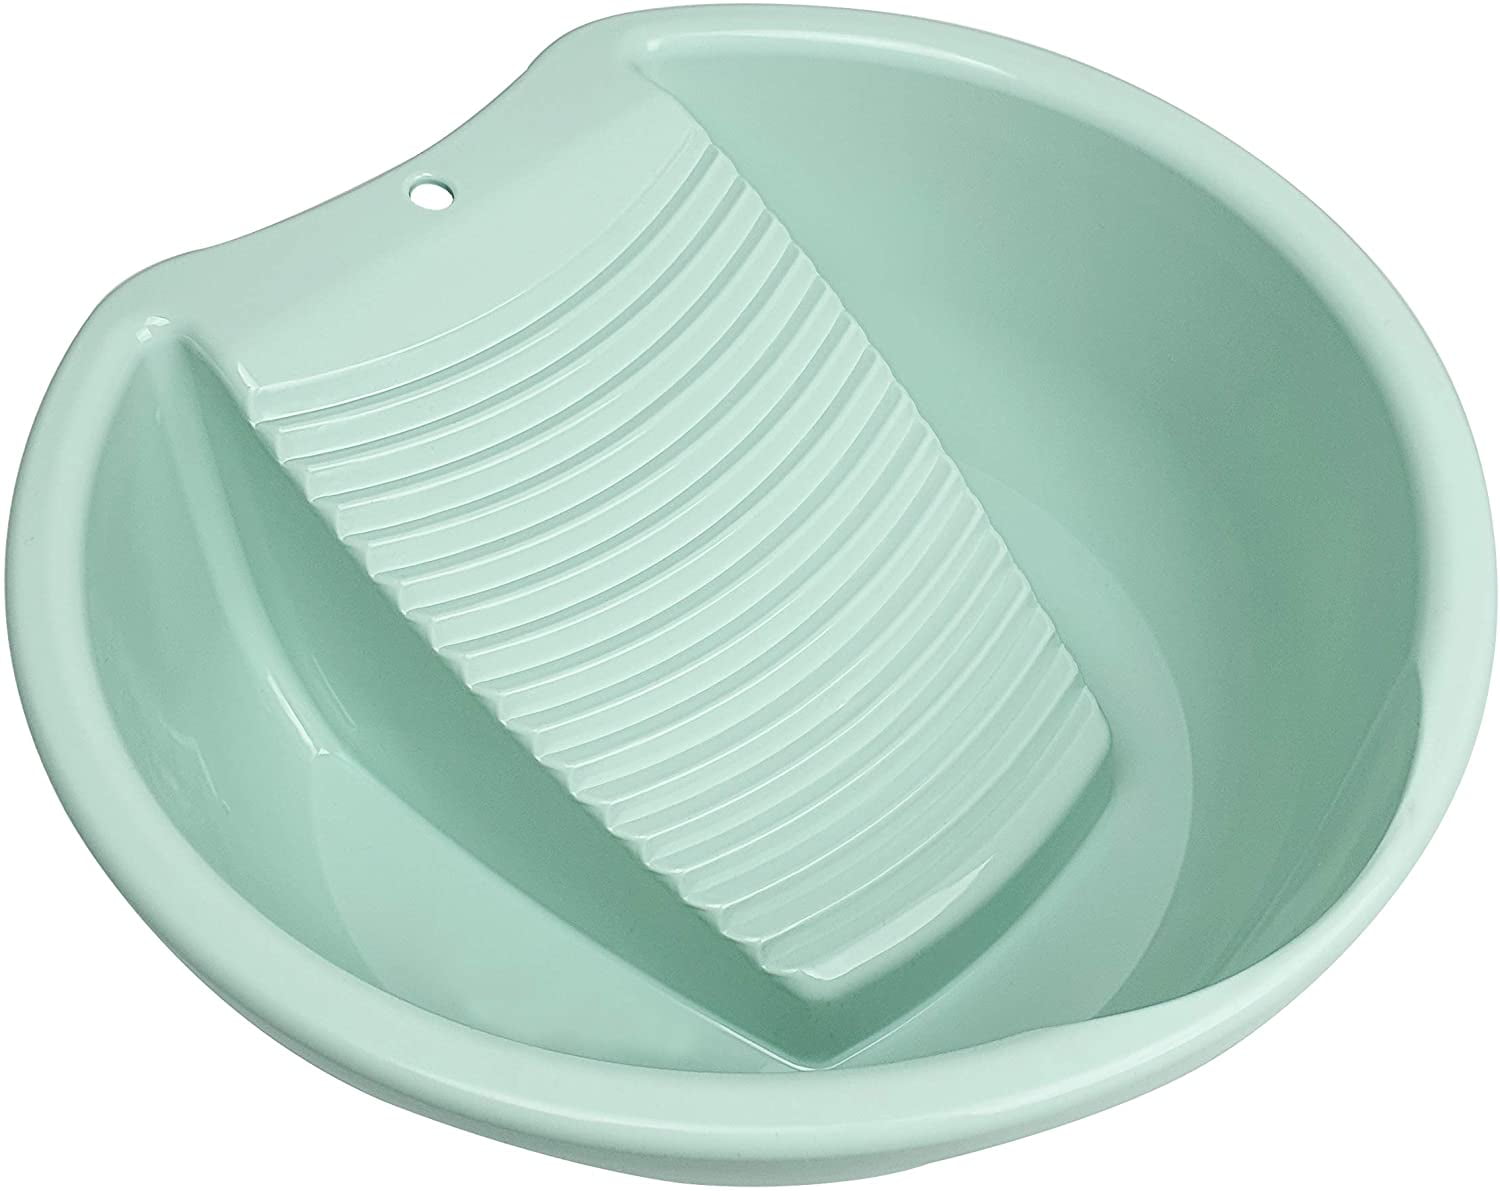 Laundry Wash Basin with Washboard: Washing Clothes Bucket Hand Wash Board  Plastic Basin for Laundry Japanese Laundry Tub for Diaper T Shirt Underwear